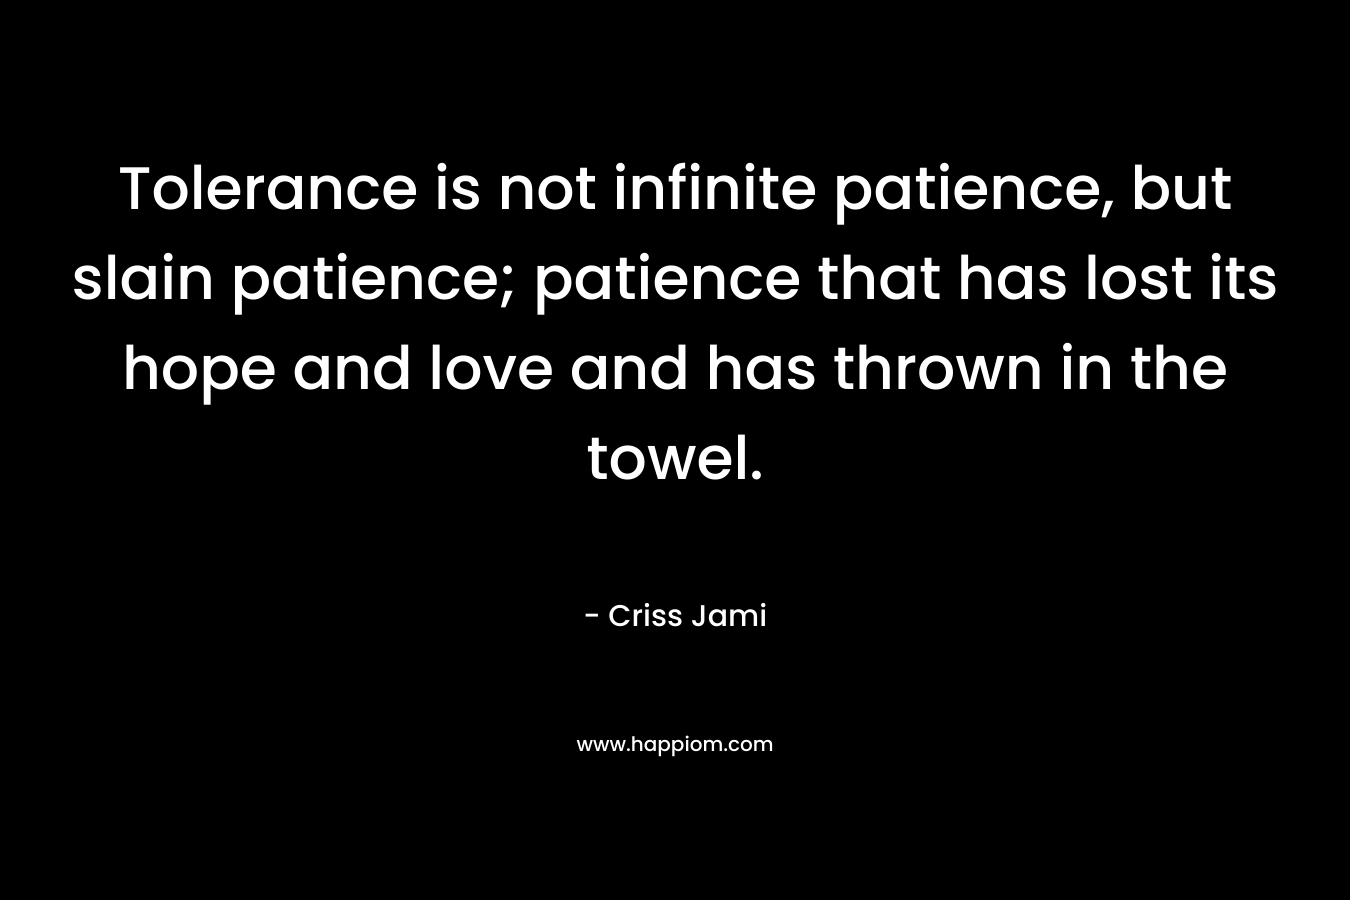 Tolerance is not infinite patience, but slain patience; patience that has lost its hope and love and has thrown in the towel. – Criss Jami